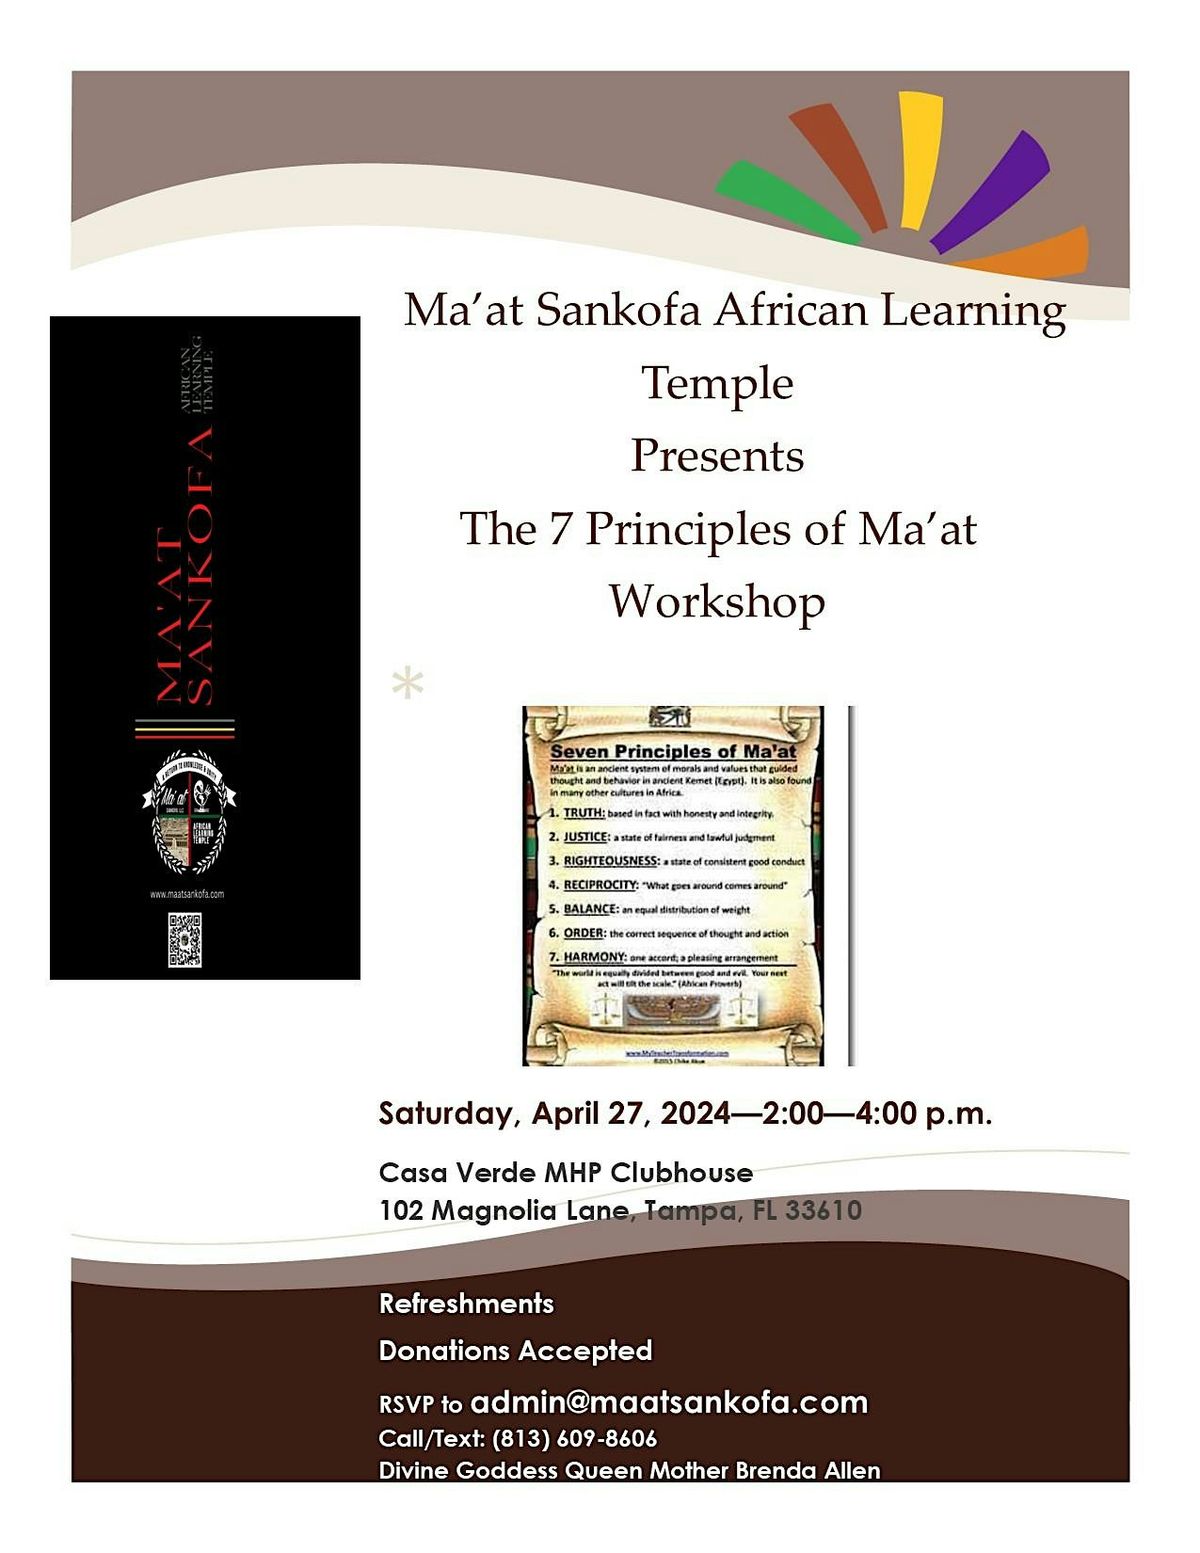 Ma'at Sankofa African Learning Temple's "7 Principles of Ma'at" Workshop